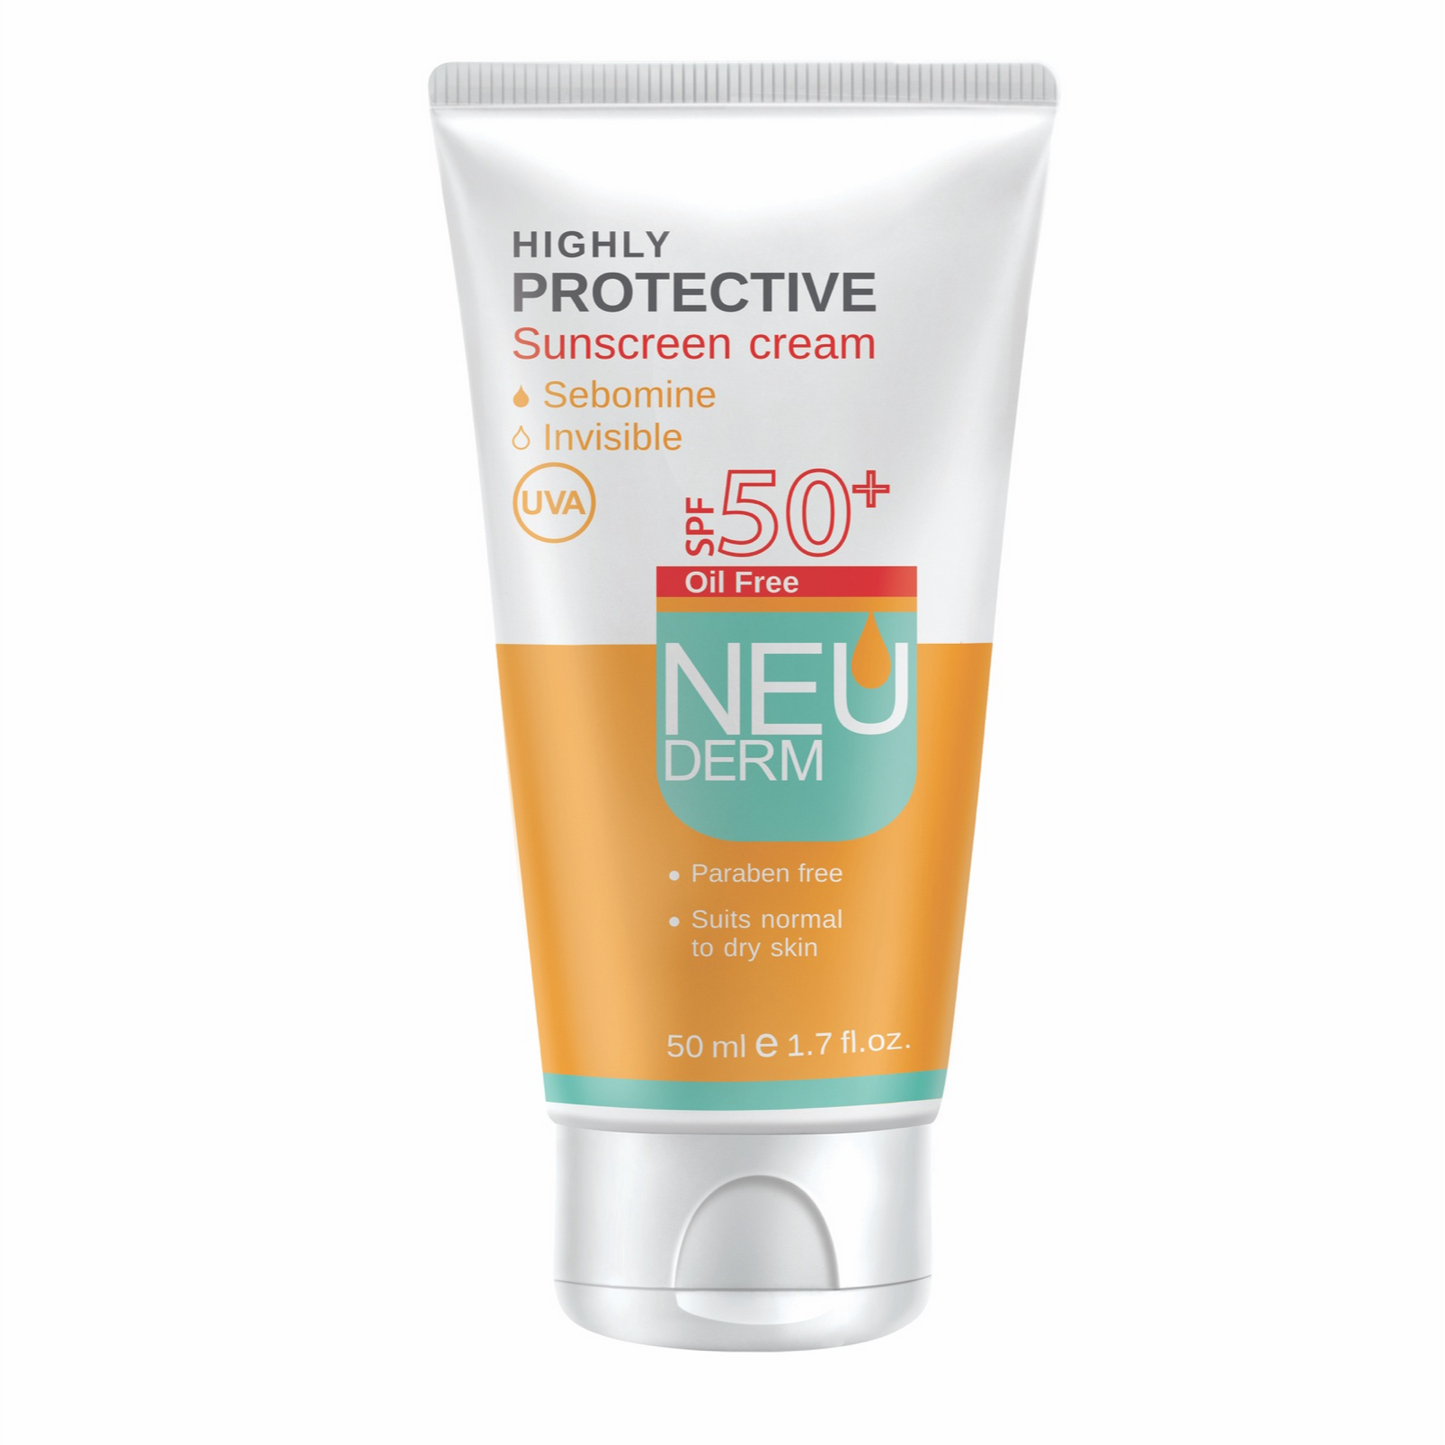 NEU DERM Highly Protective Sunscreen Cream (Invisible, Oil Free)